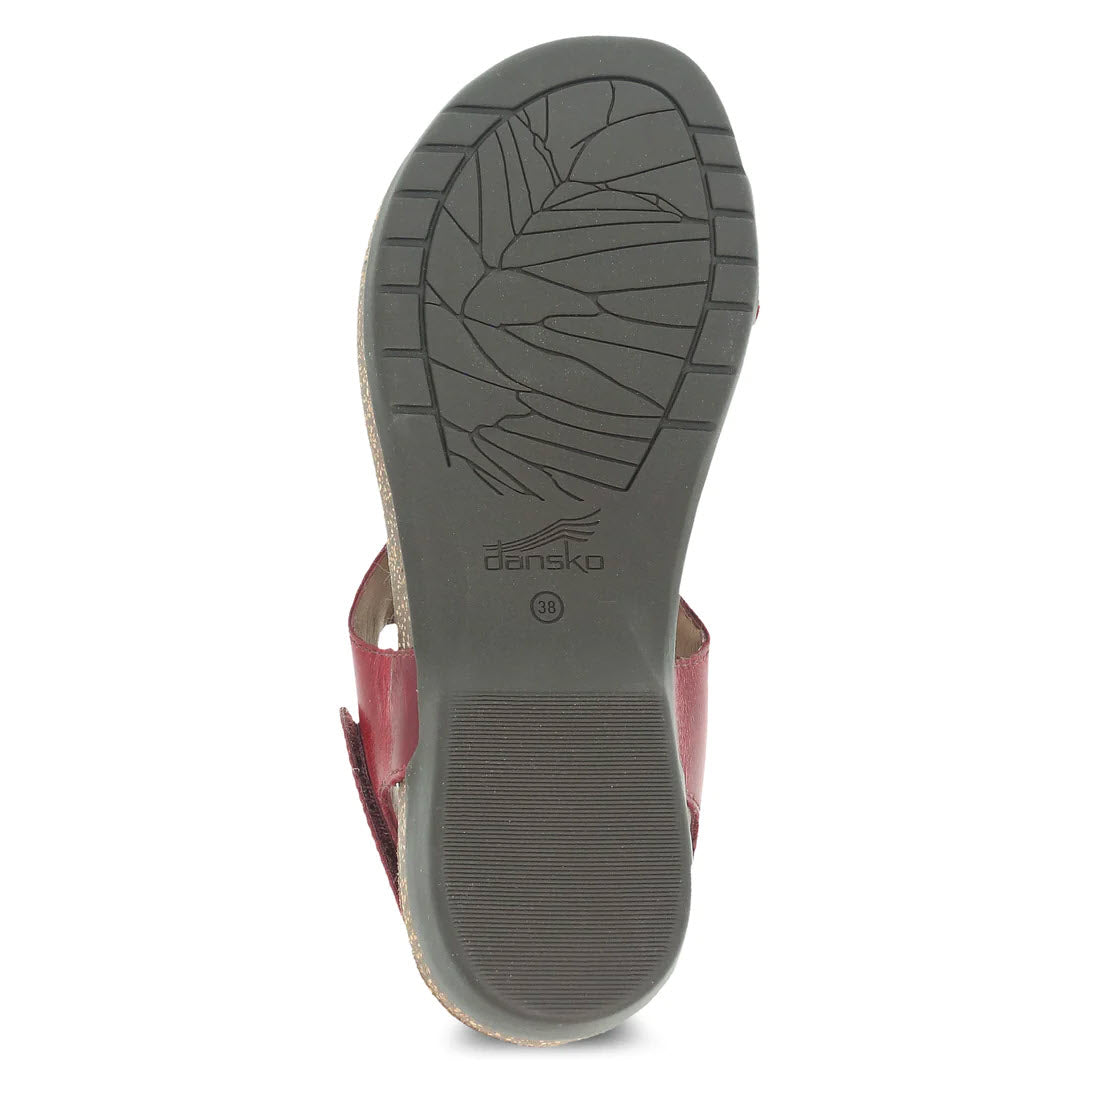 Sole of a red Dansko Reece Cinnabar shoe showing tread pattern and brand logo with leather linings.